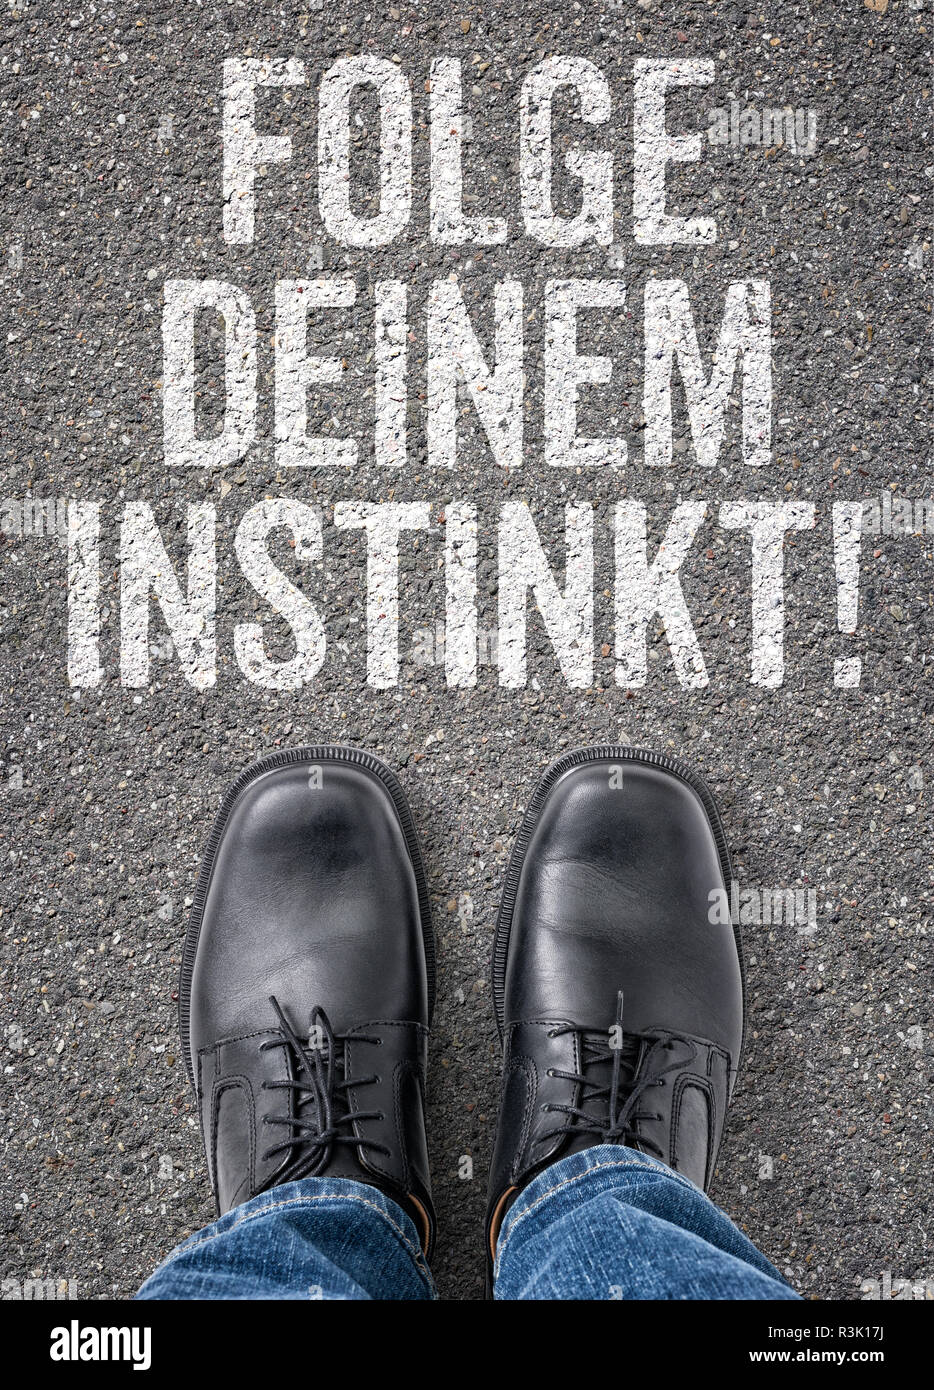 text on the ground - follow your instinct Stock Photo